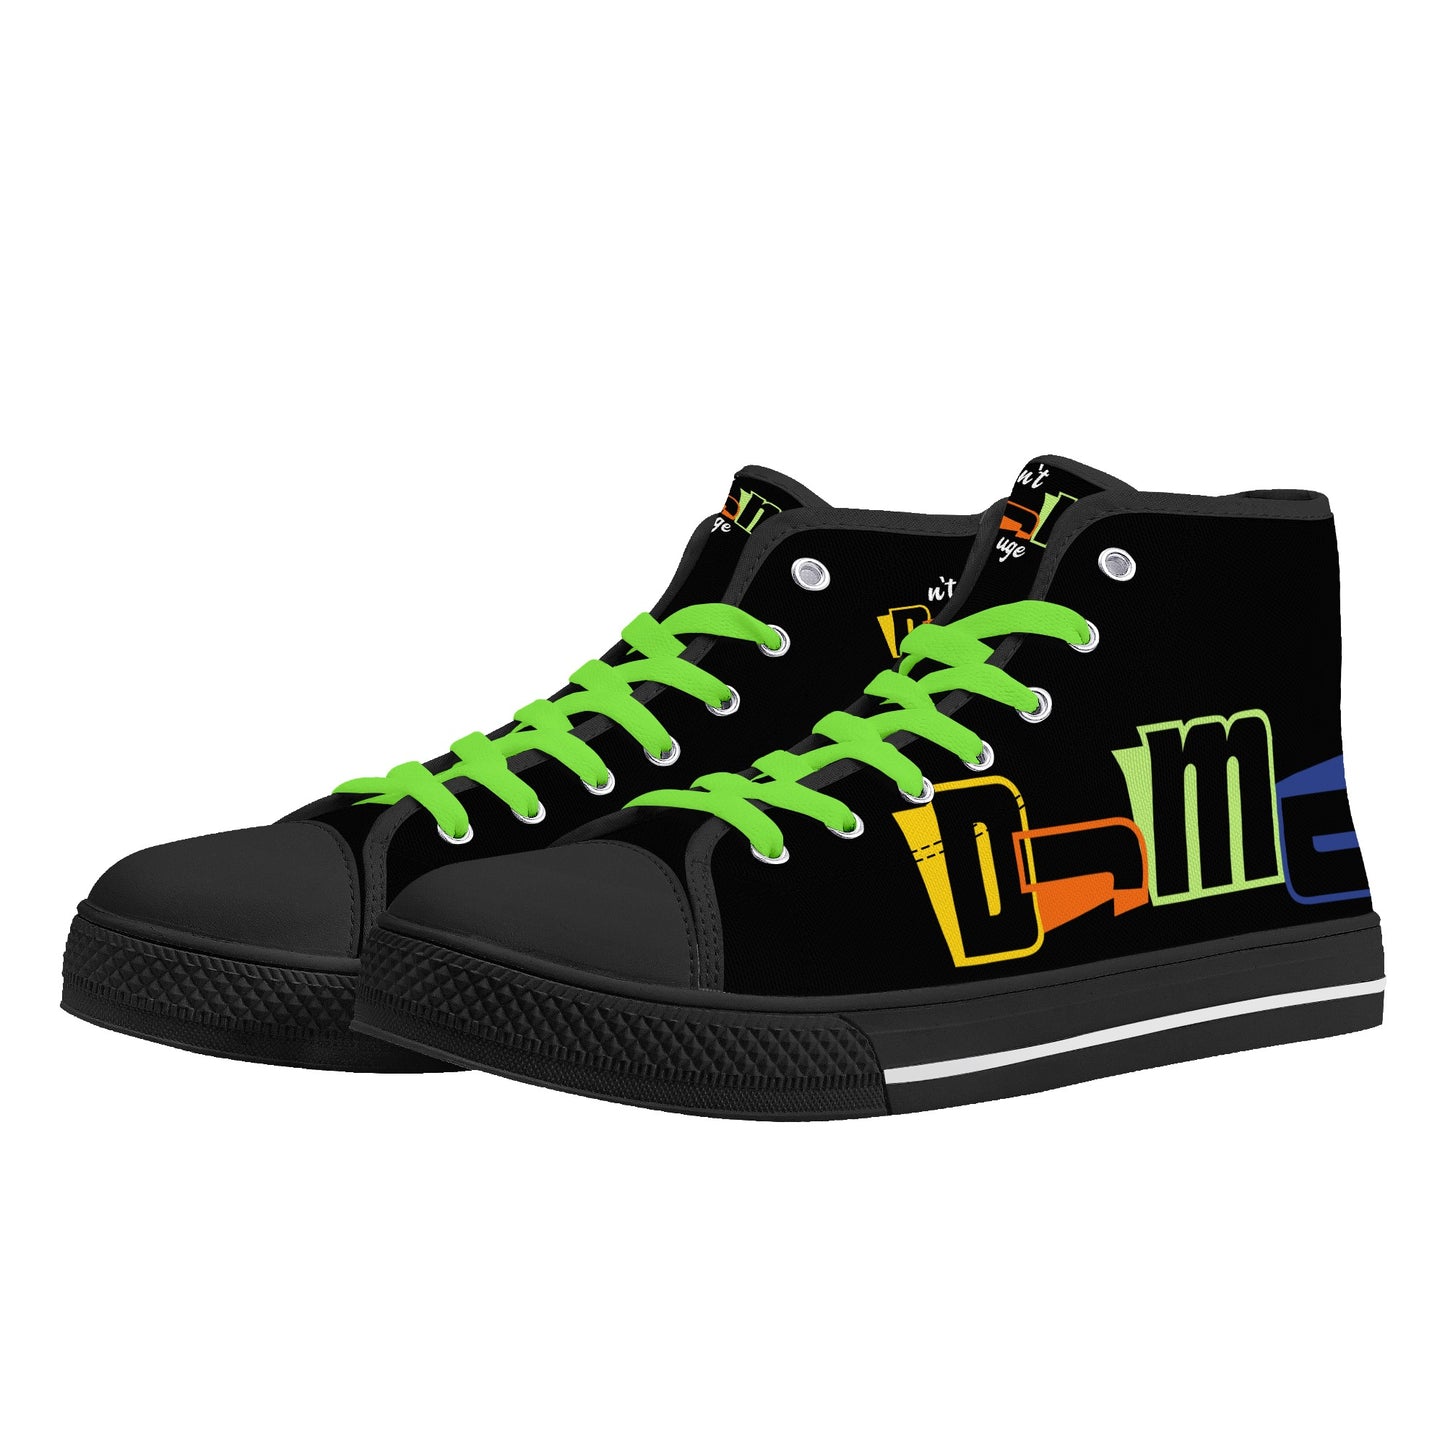 DJMD Womens High Top Canvas Shoes - Customized Tongue